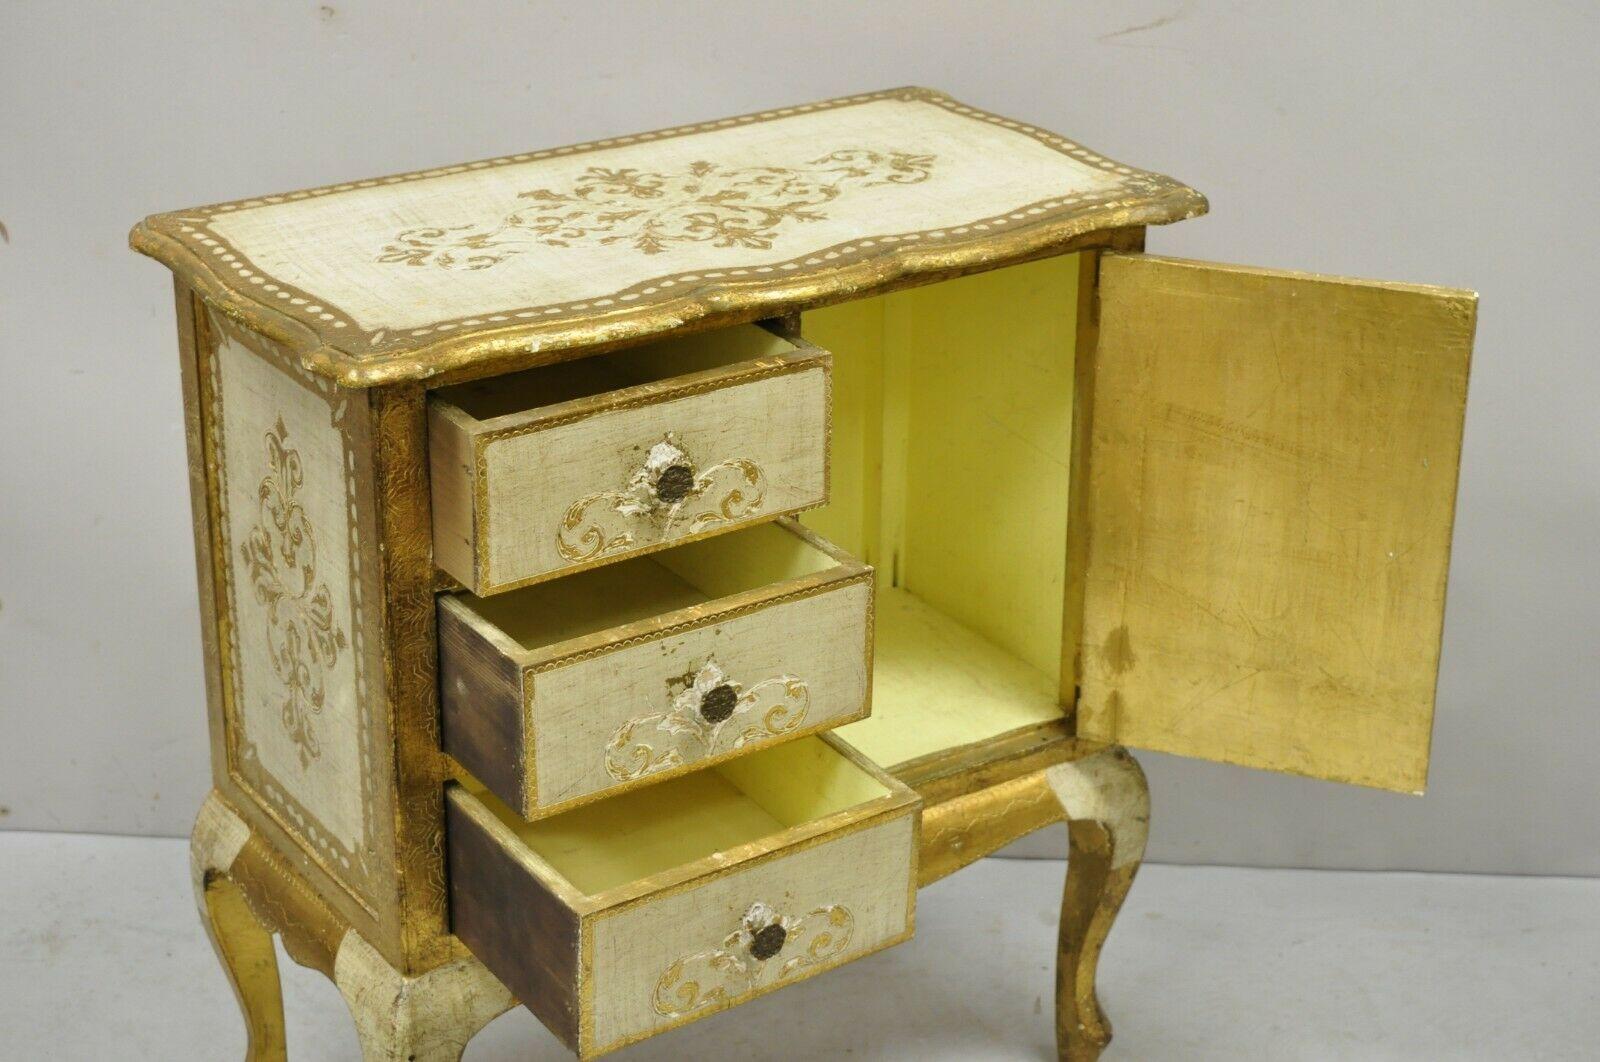 20th Century Vintage Italian Florentine Cream and Gold Small Nightstand Side Table Cabinet